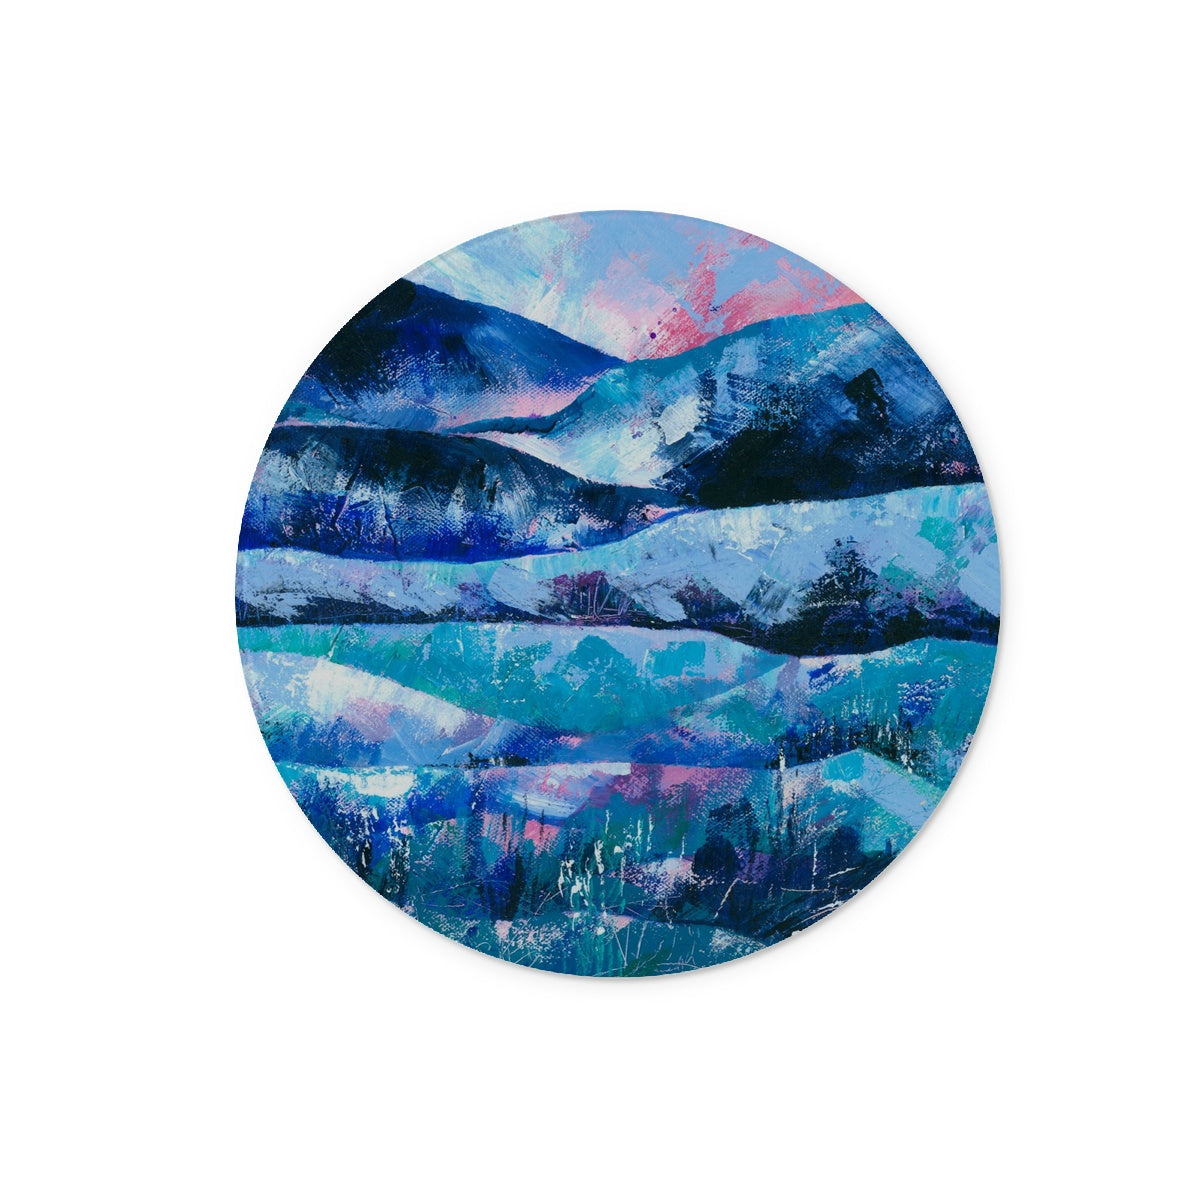 Round glass chopping board featuring a blue and pink original abstract landscape art print.